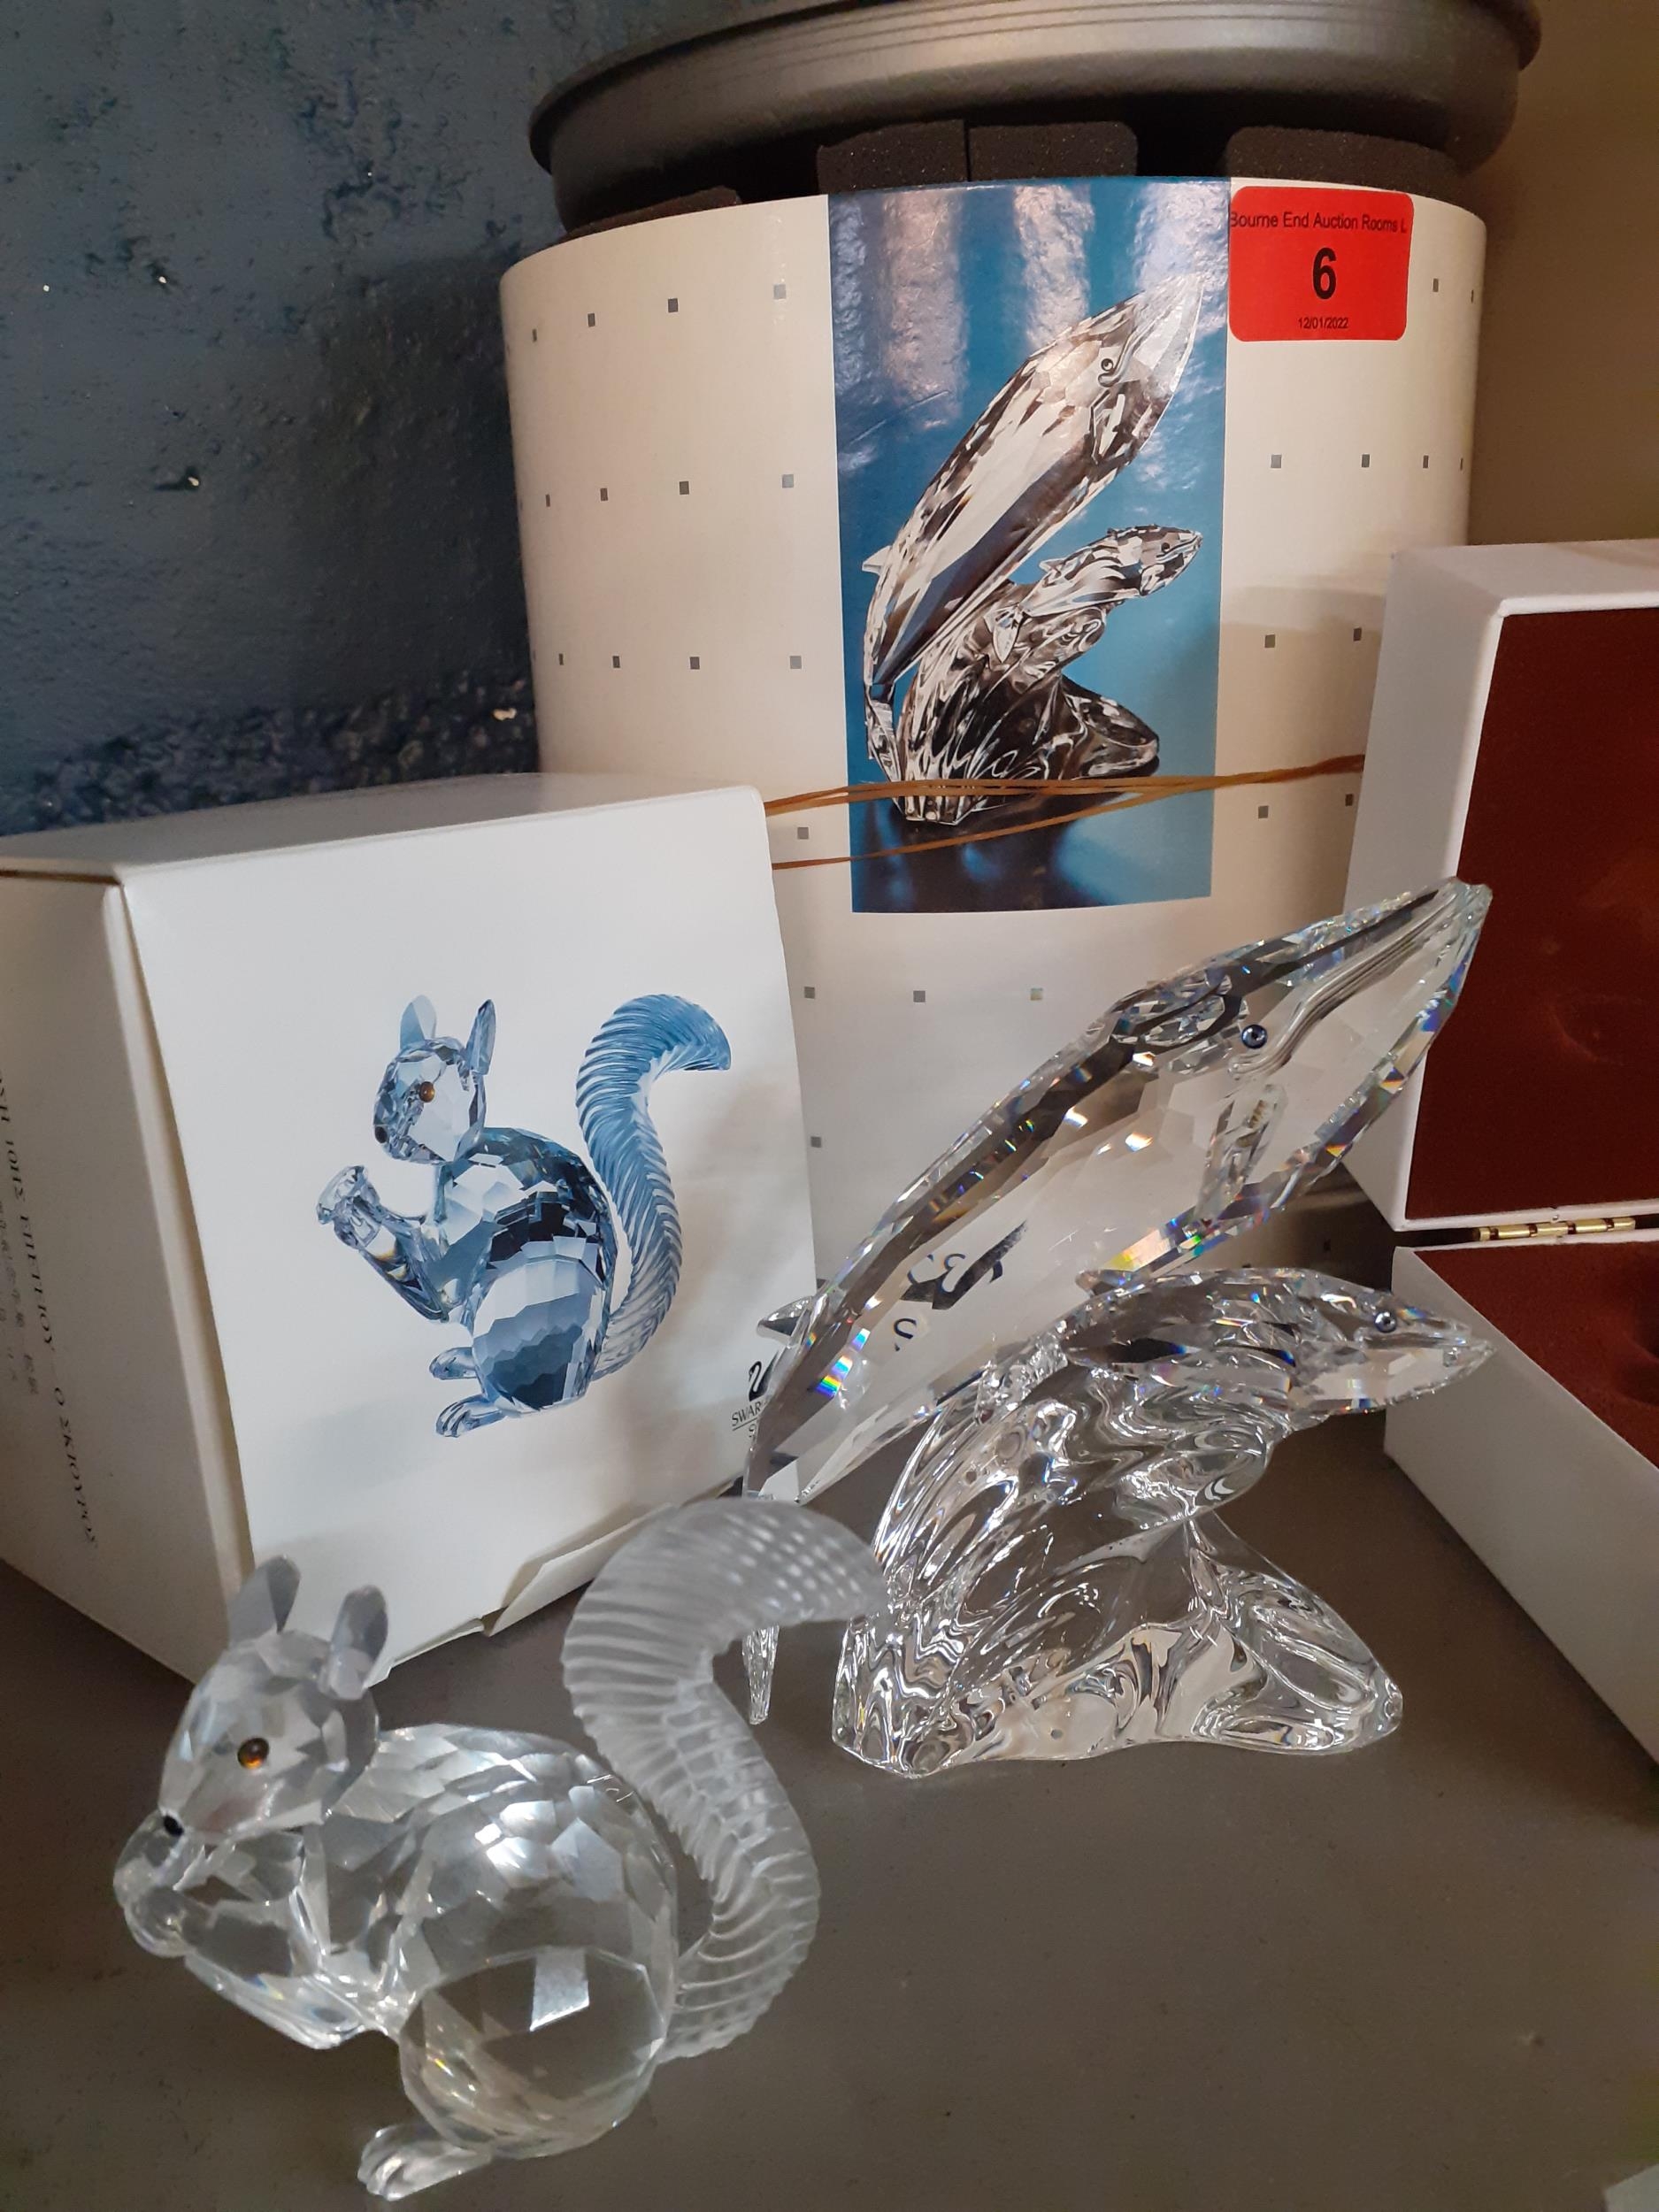 Swarovski SCS collectables - a crystal model of a whale and her cub on an integral mount together